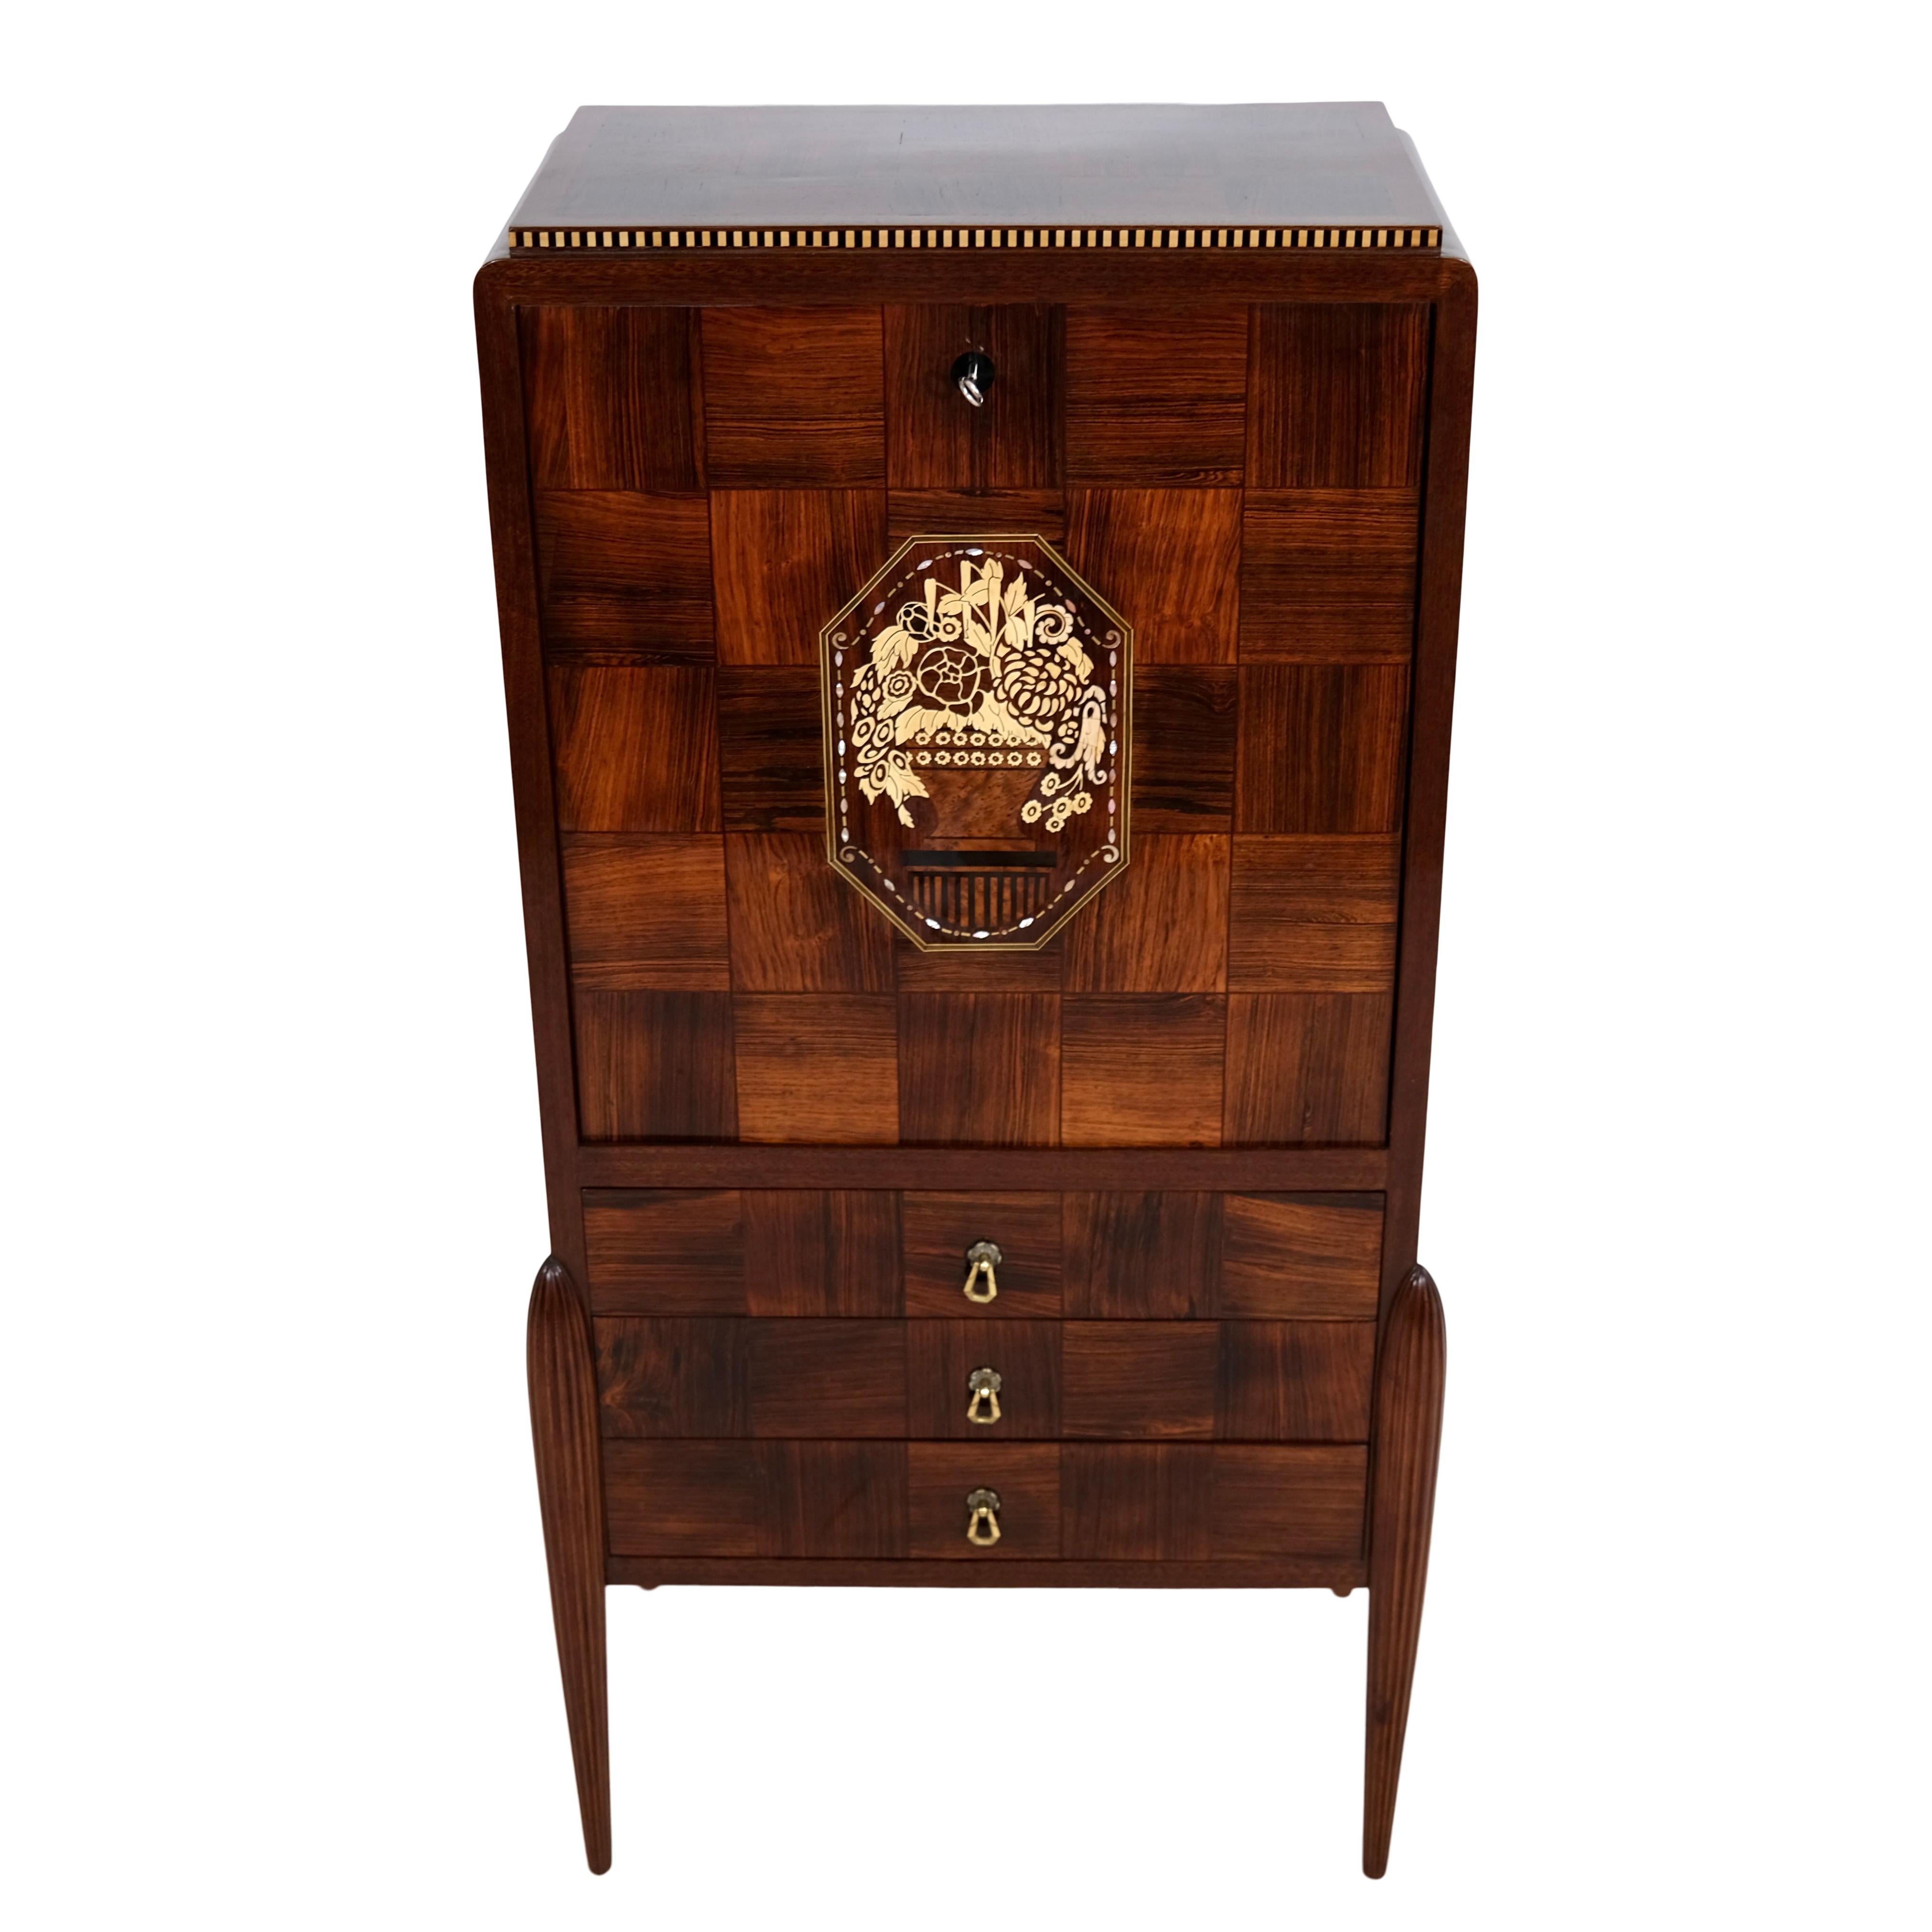 Early 20th Century Early French Art Deco Secretaire Desk with Marquetry and Inlays For Sale